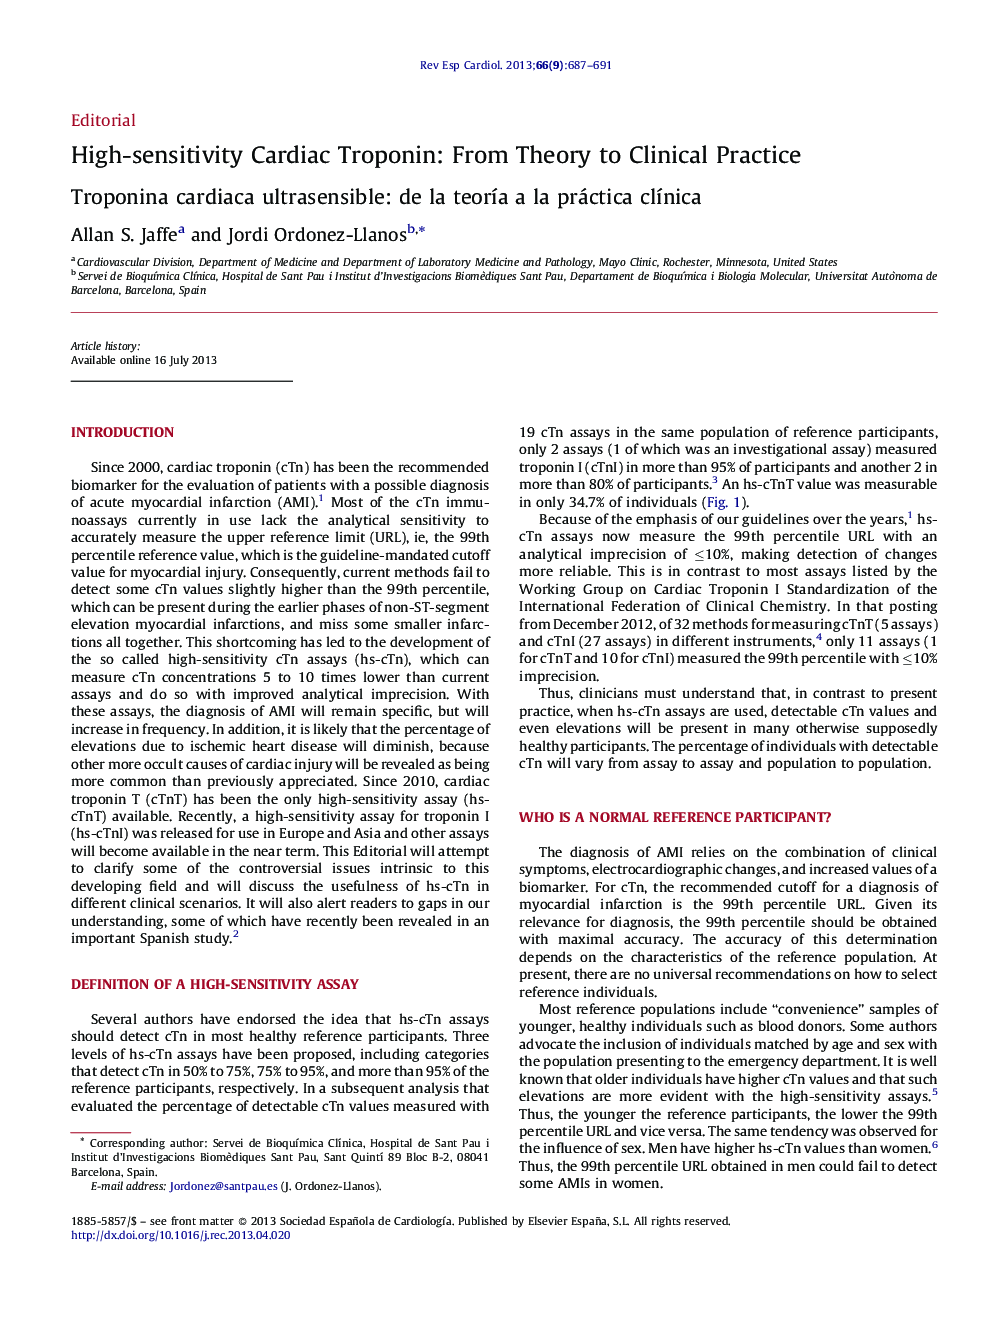 High-sensitivity Cardiac Troponin: From Theory to Clinical Practice